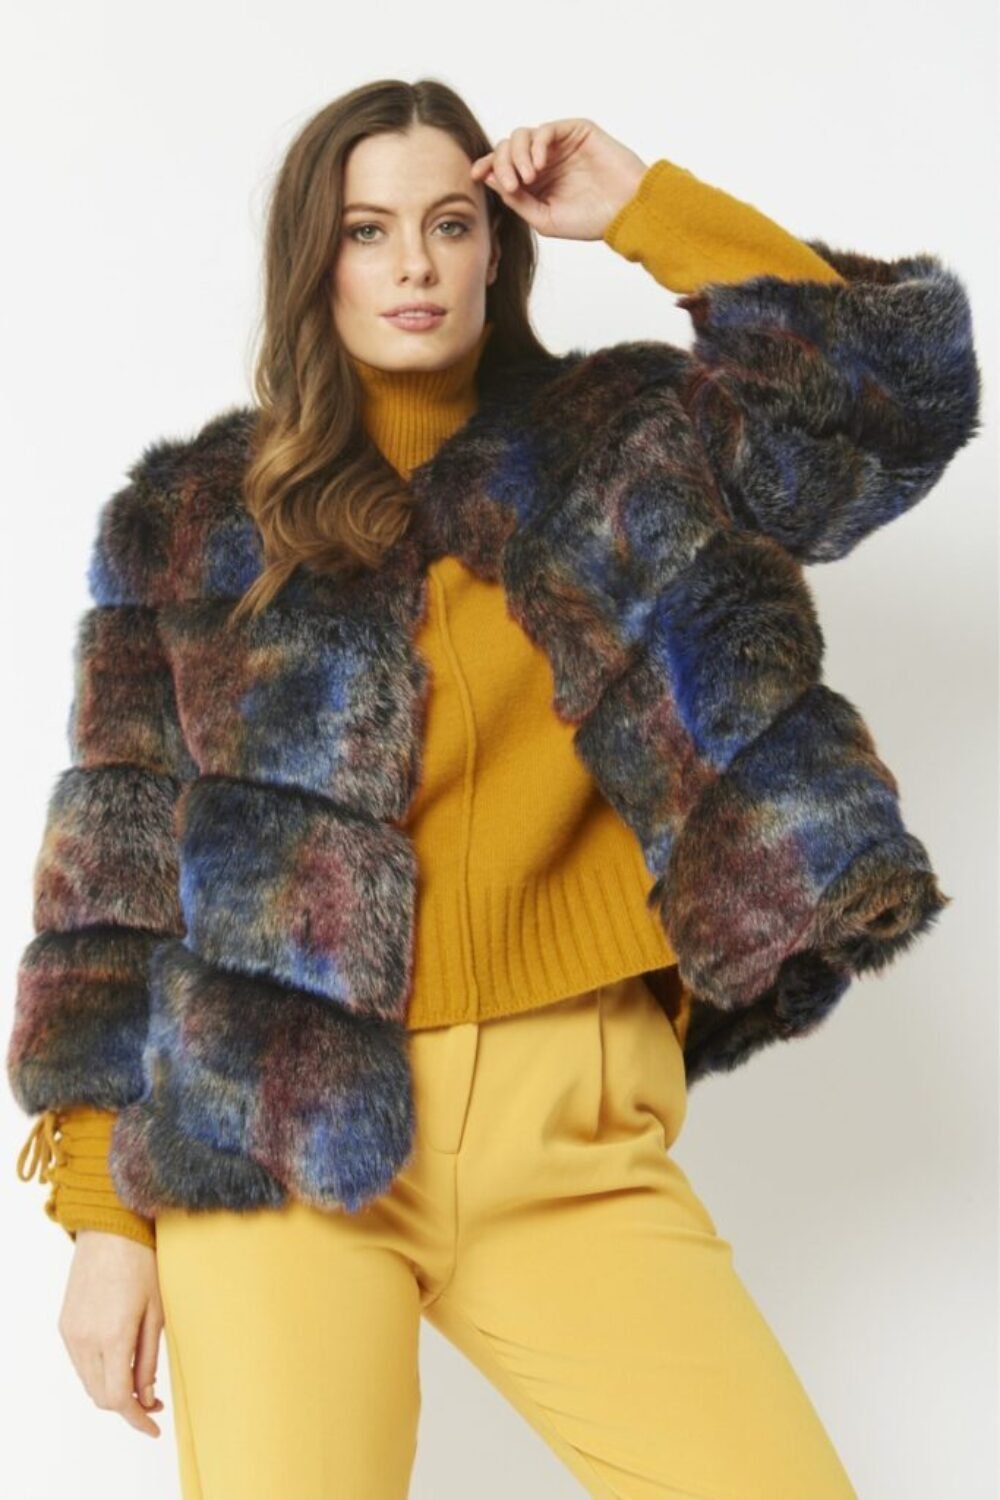 Shop Lux Multi Faux Fur Ella Coat and women's luxury and designer clothes at www.lux-apparel.co.uk